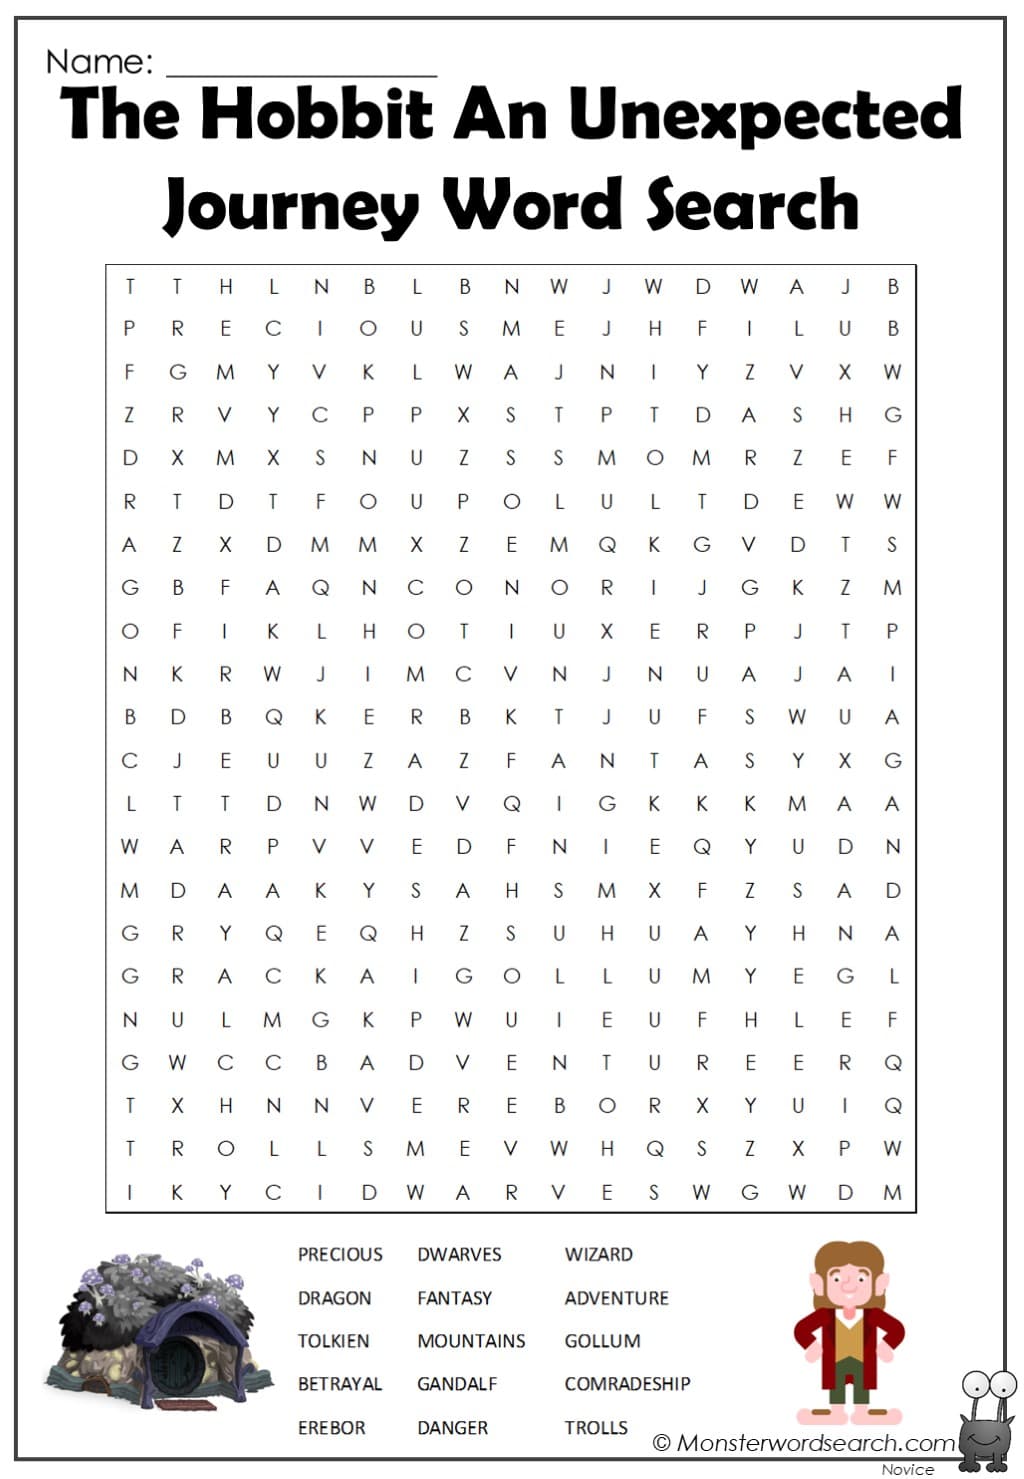 The Hobbit An Unexpected Journey Word Search